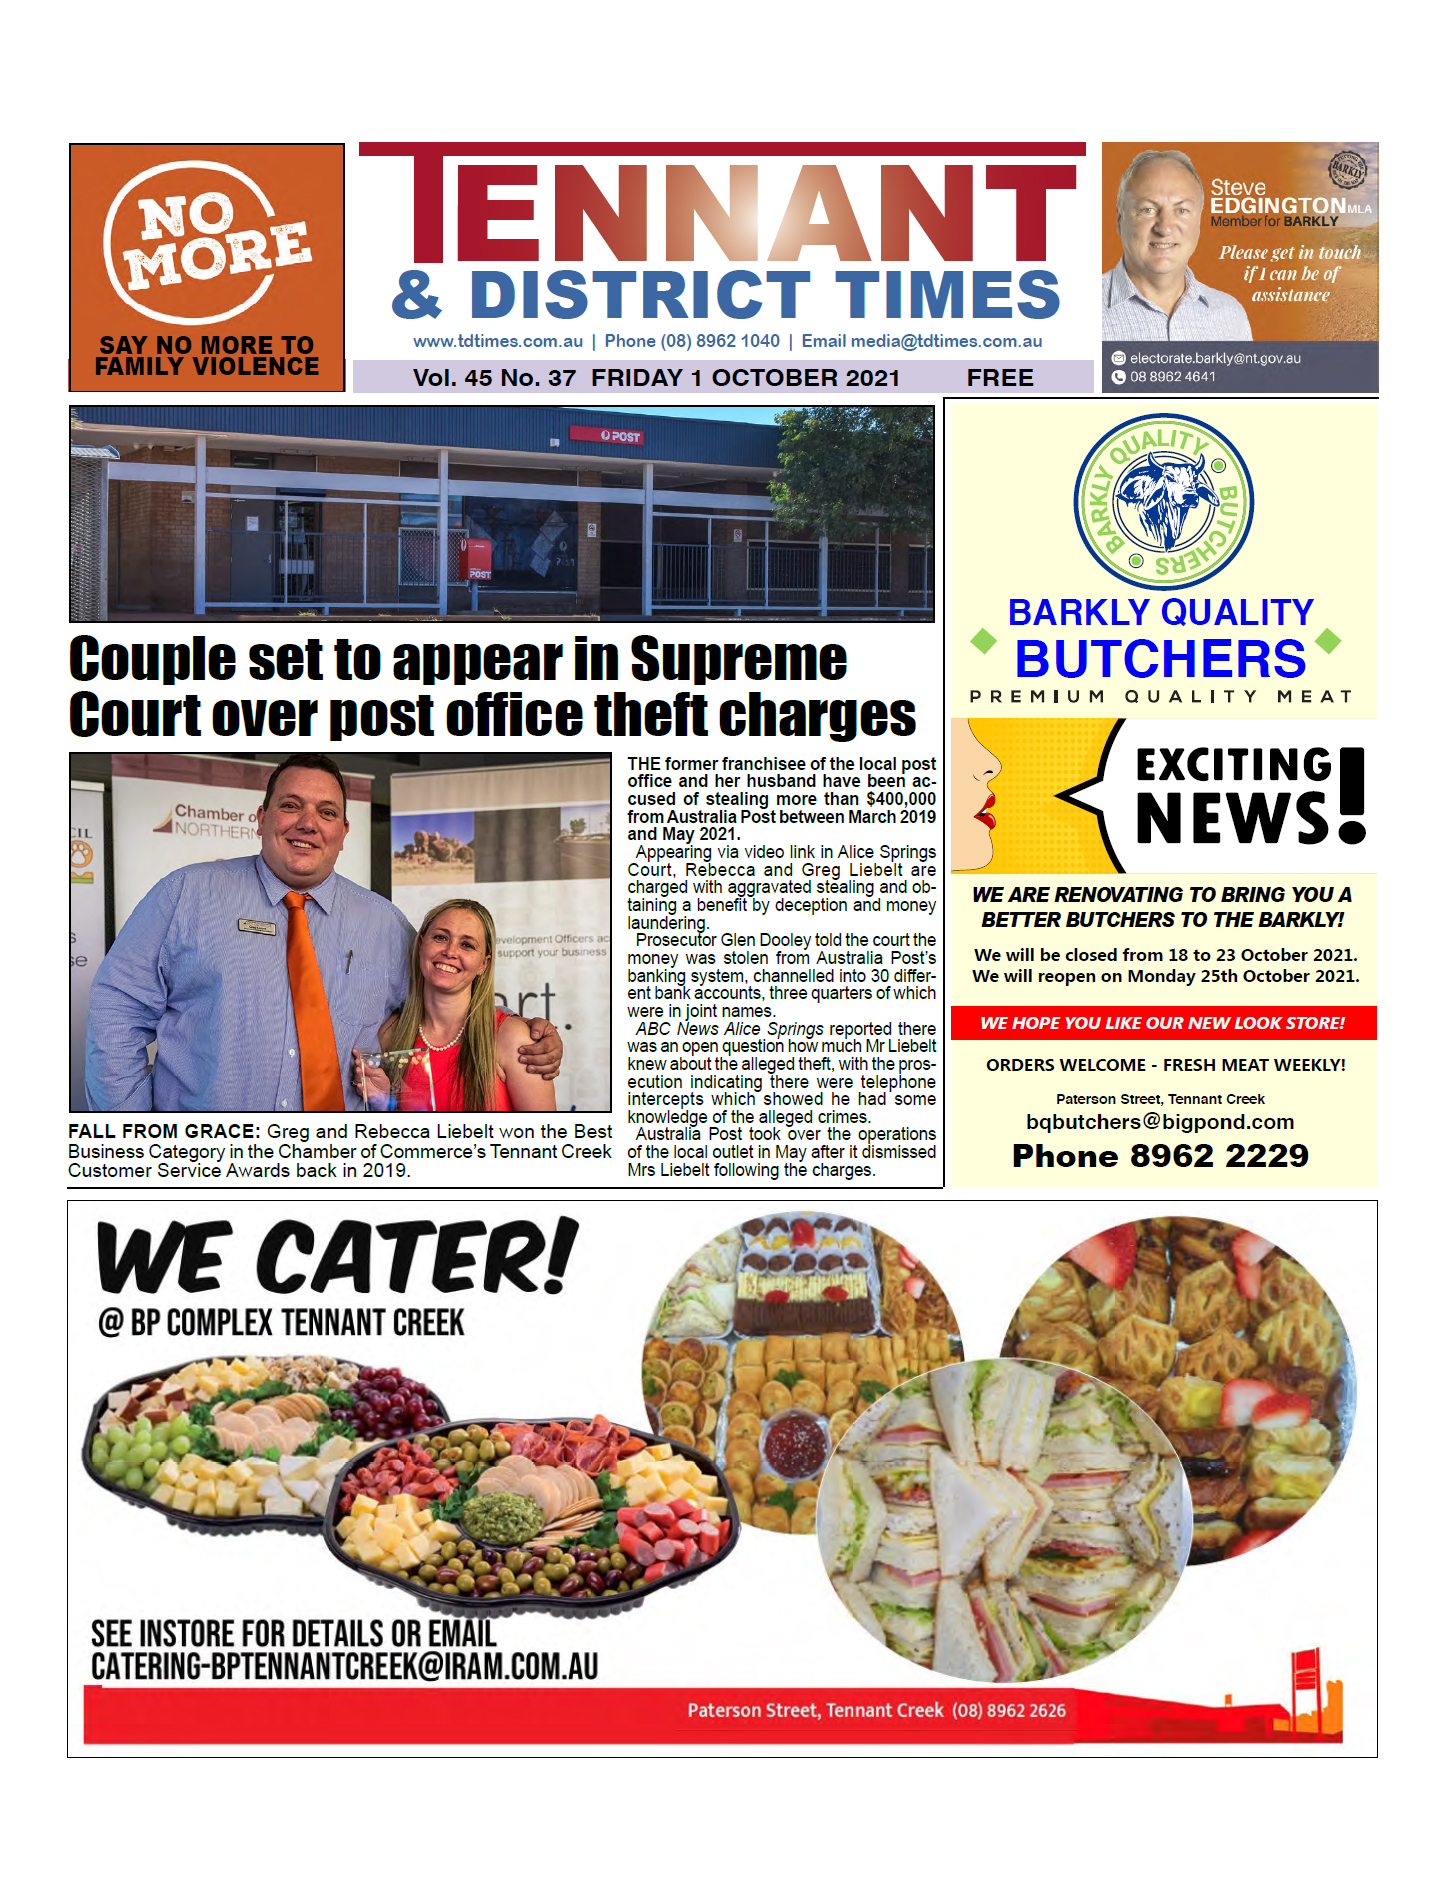 Tennant & District Times 1 October 2021